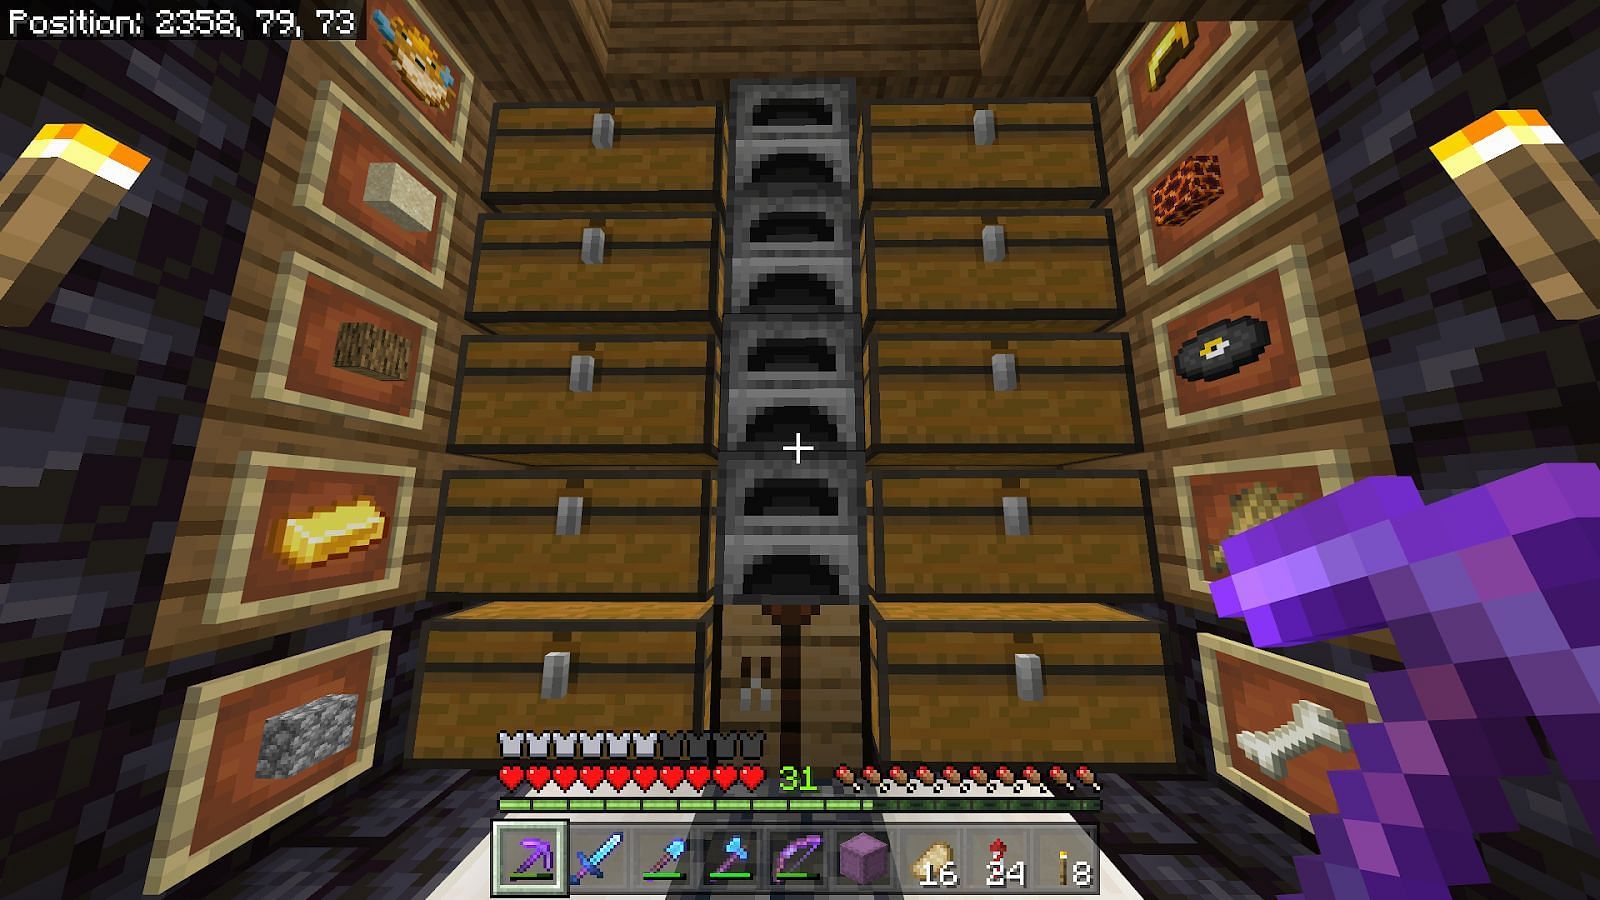 Chest loot in a mineshaft (Image via Minecraft)